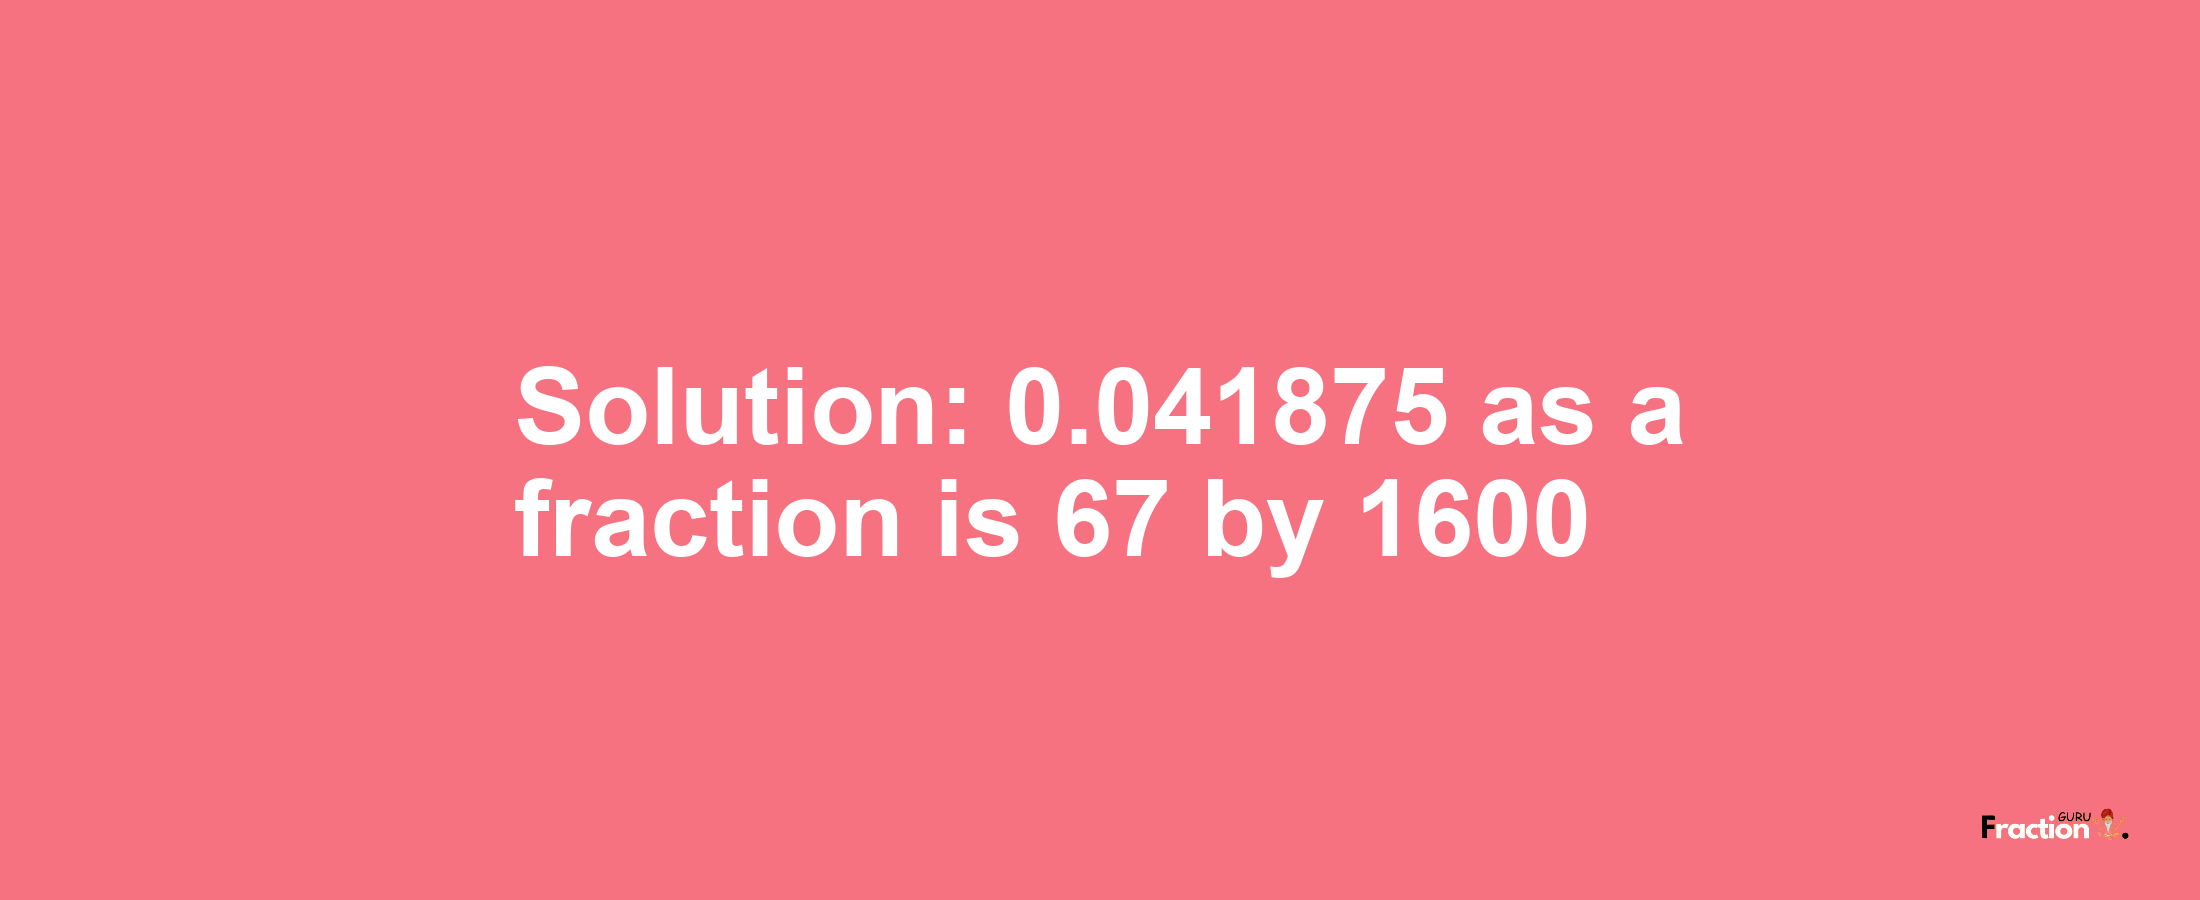 Solution:0.041875 as a fraction is 67/1600